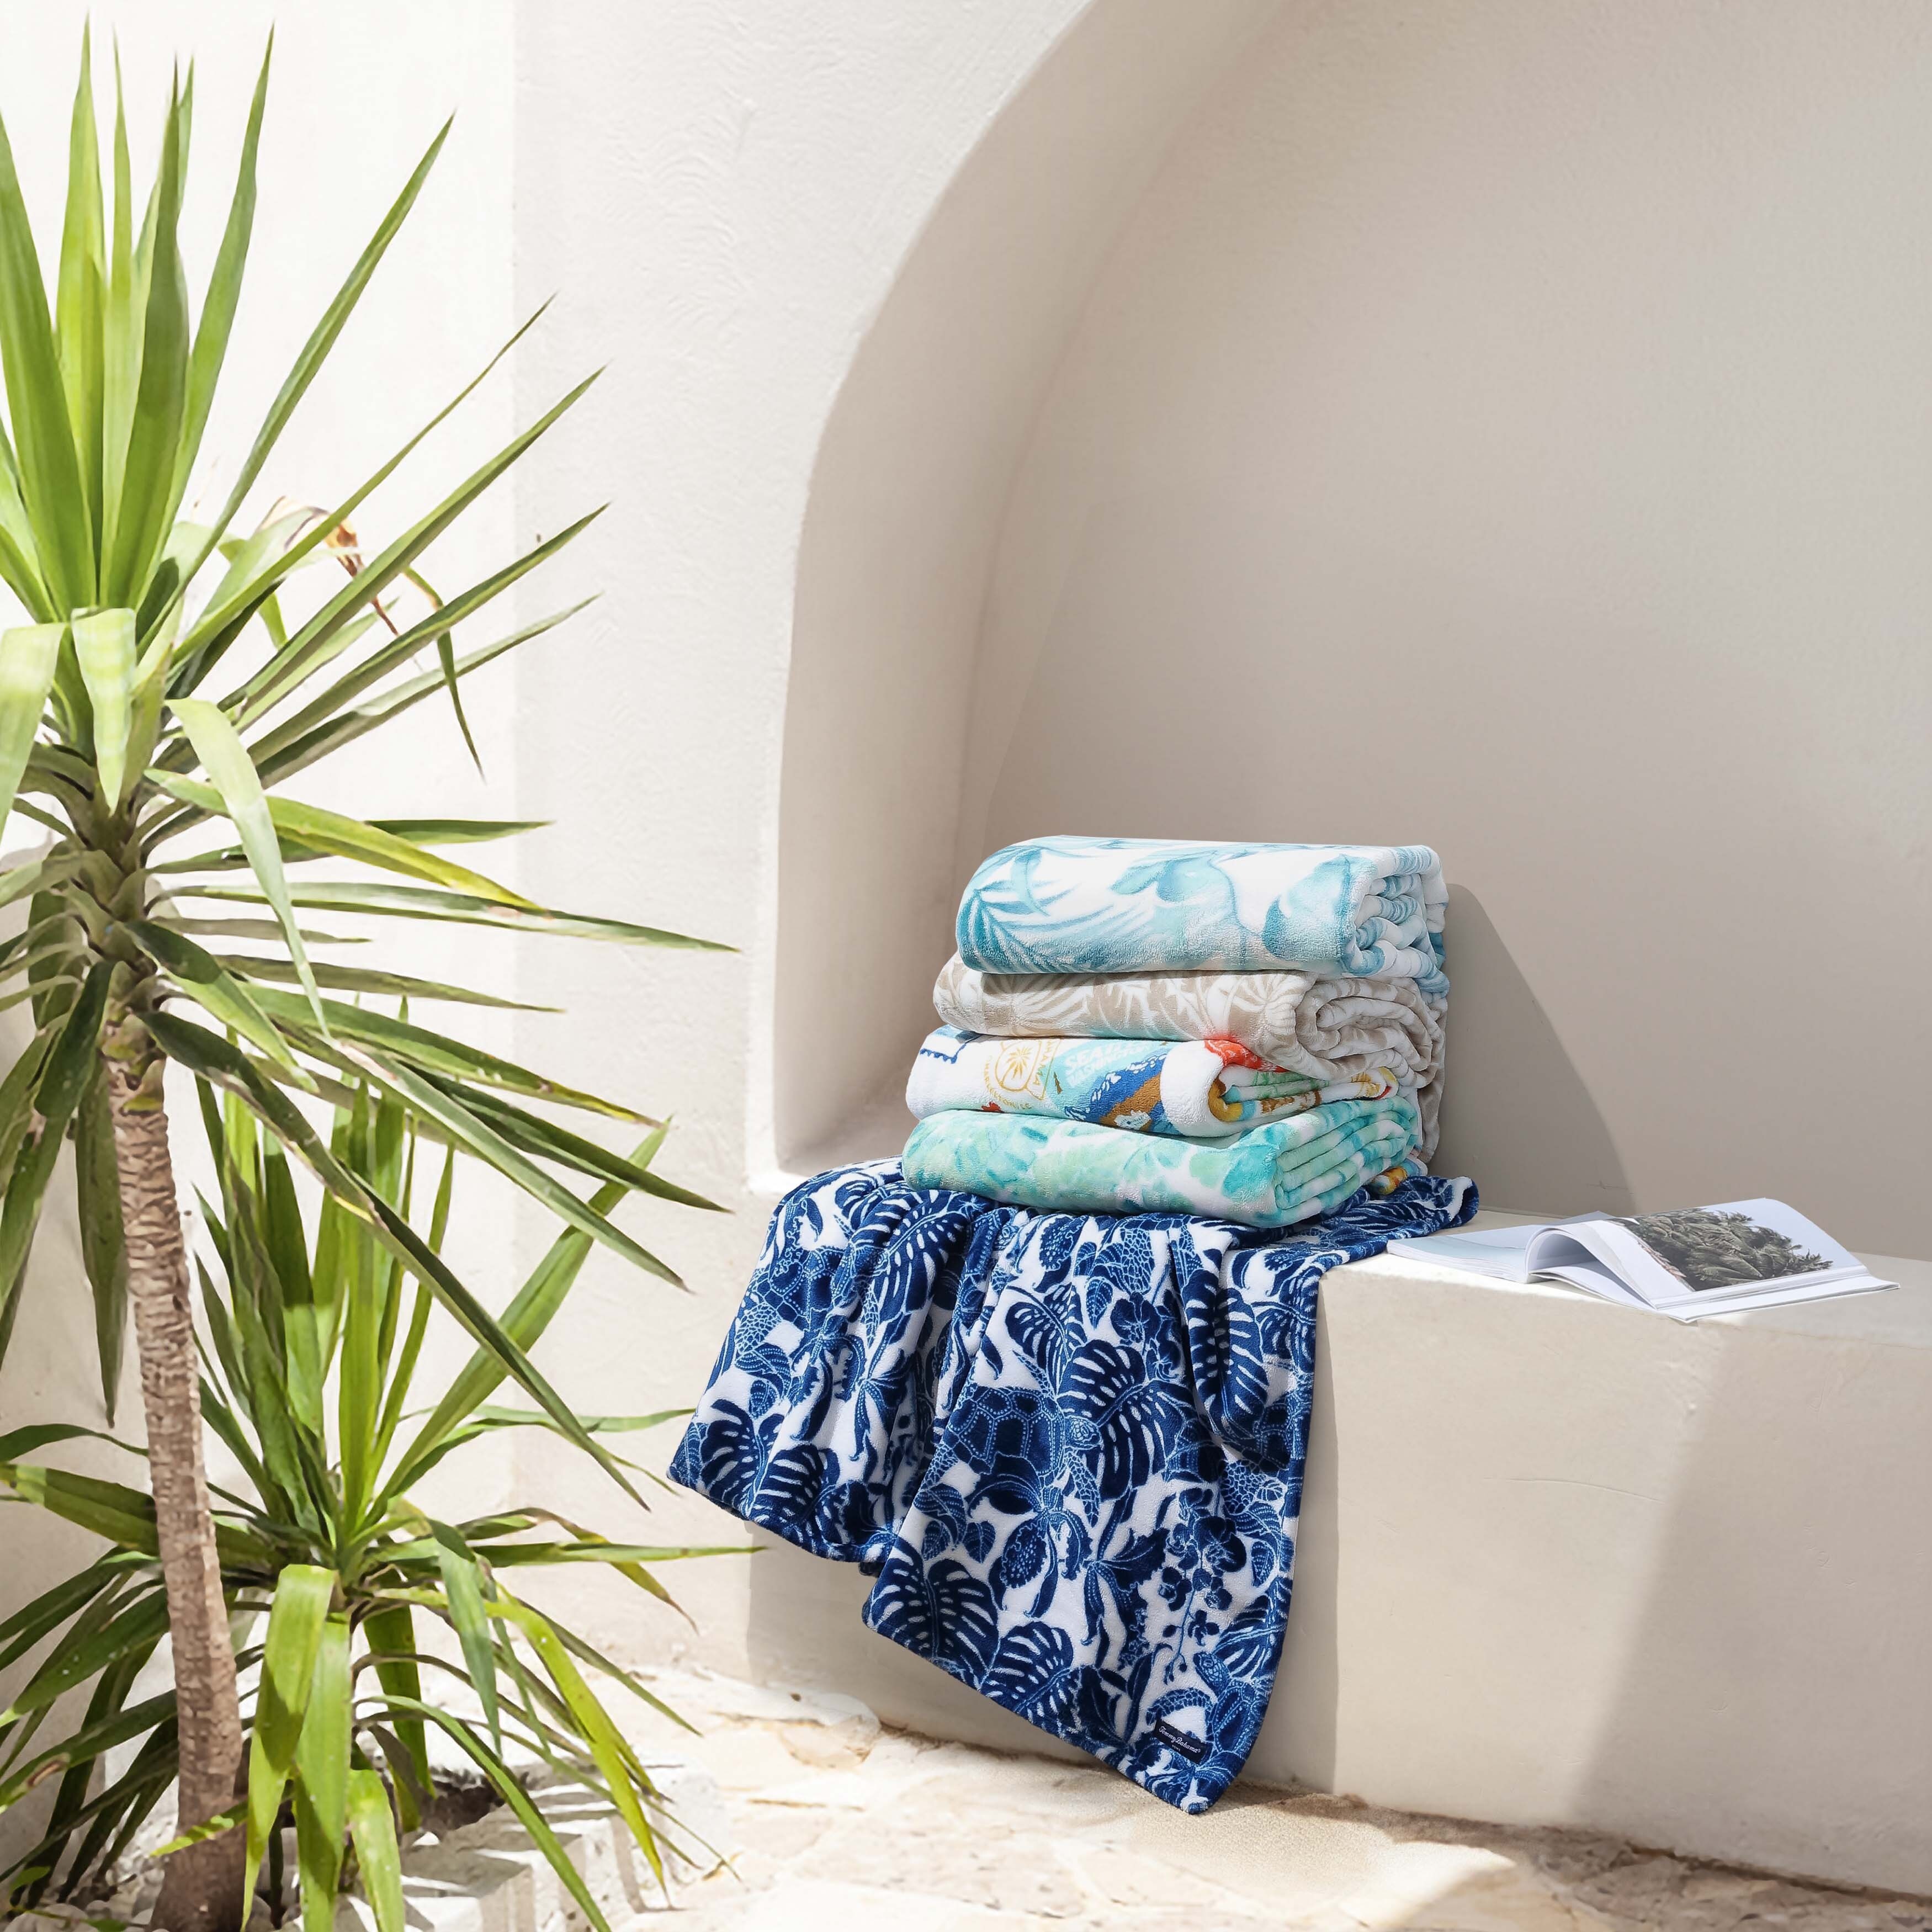 Get Tommy Bahama's indulgently soft throw at a dreamy, limited